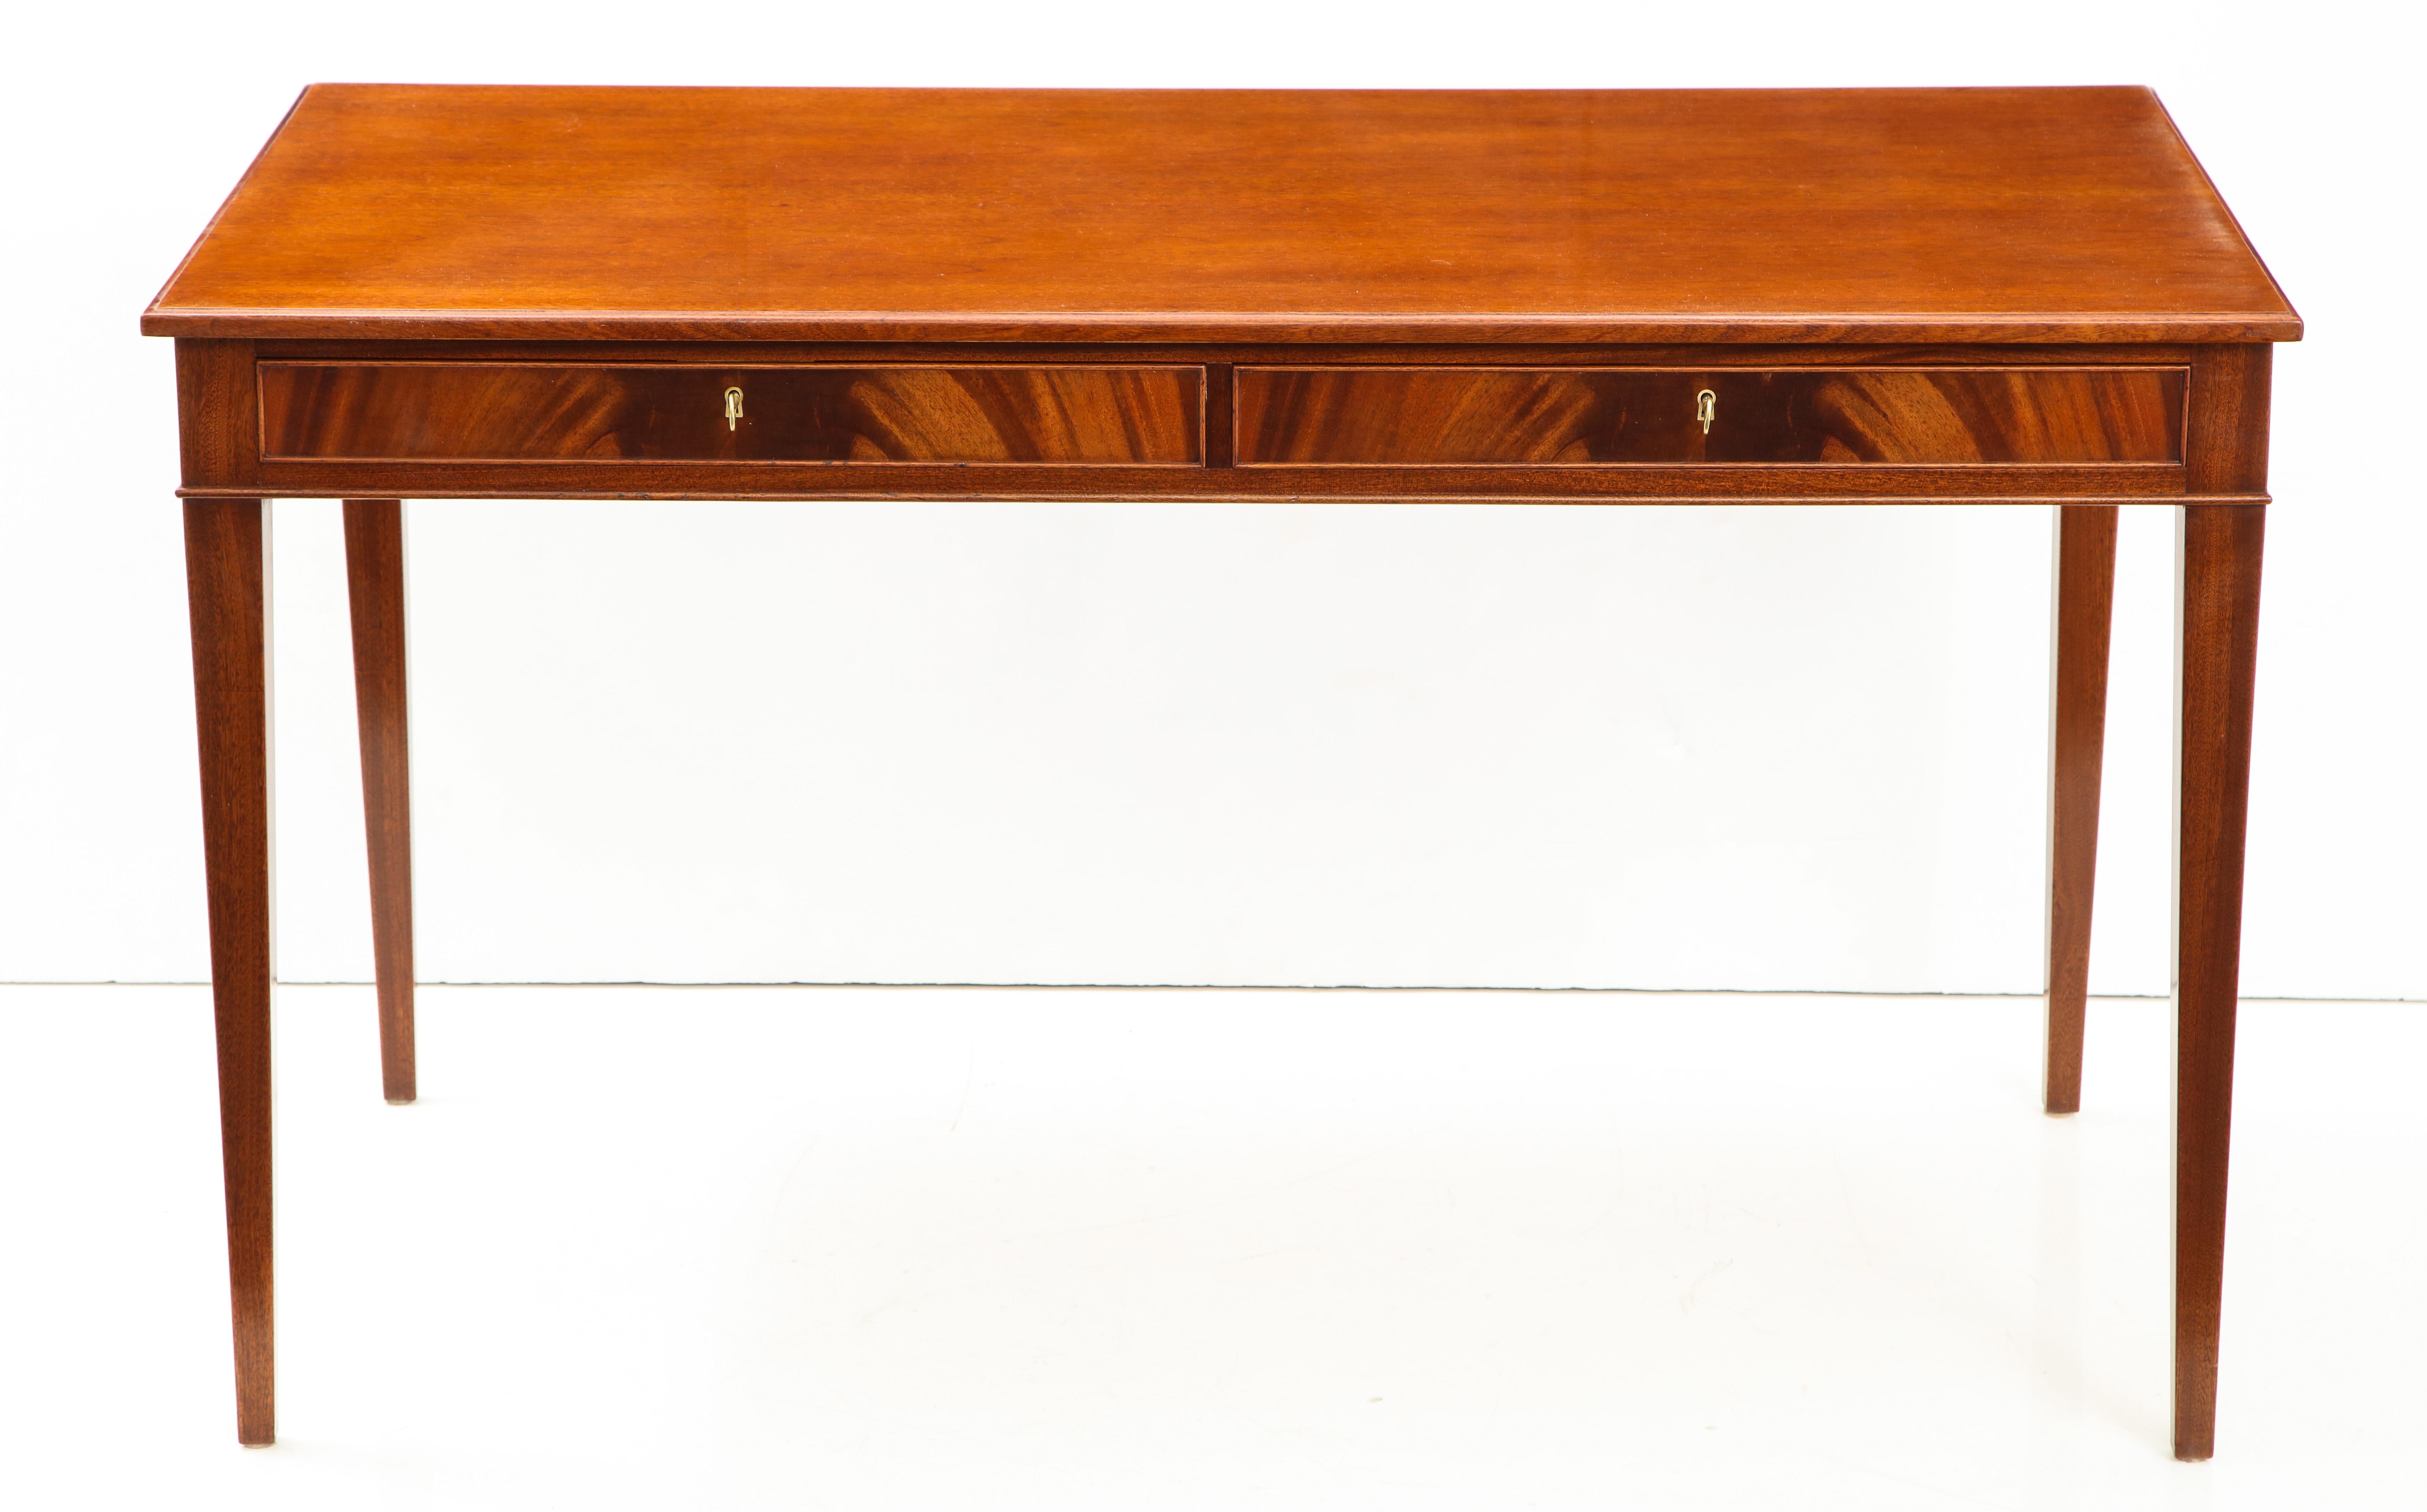 A Danish mahogany writing table by Frits Henningsen, furniture designer and cabinet maker (1889-1965). This desk is a classic example of Henningsen's elegant clean lines and use of quality woods with perfect balanced craftsmanship. A rectangular top